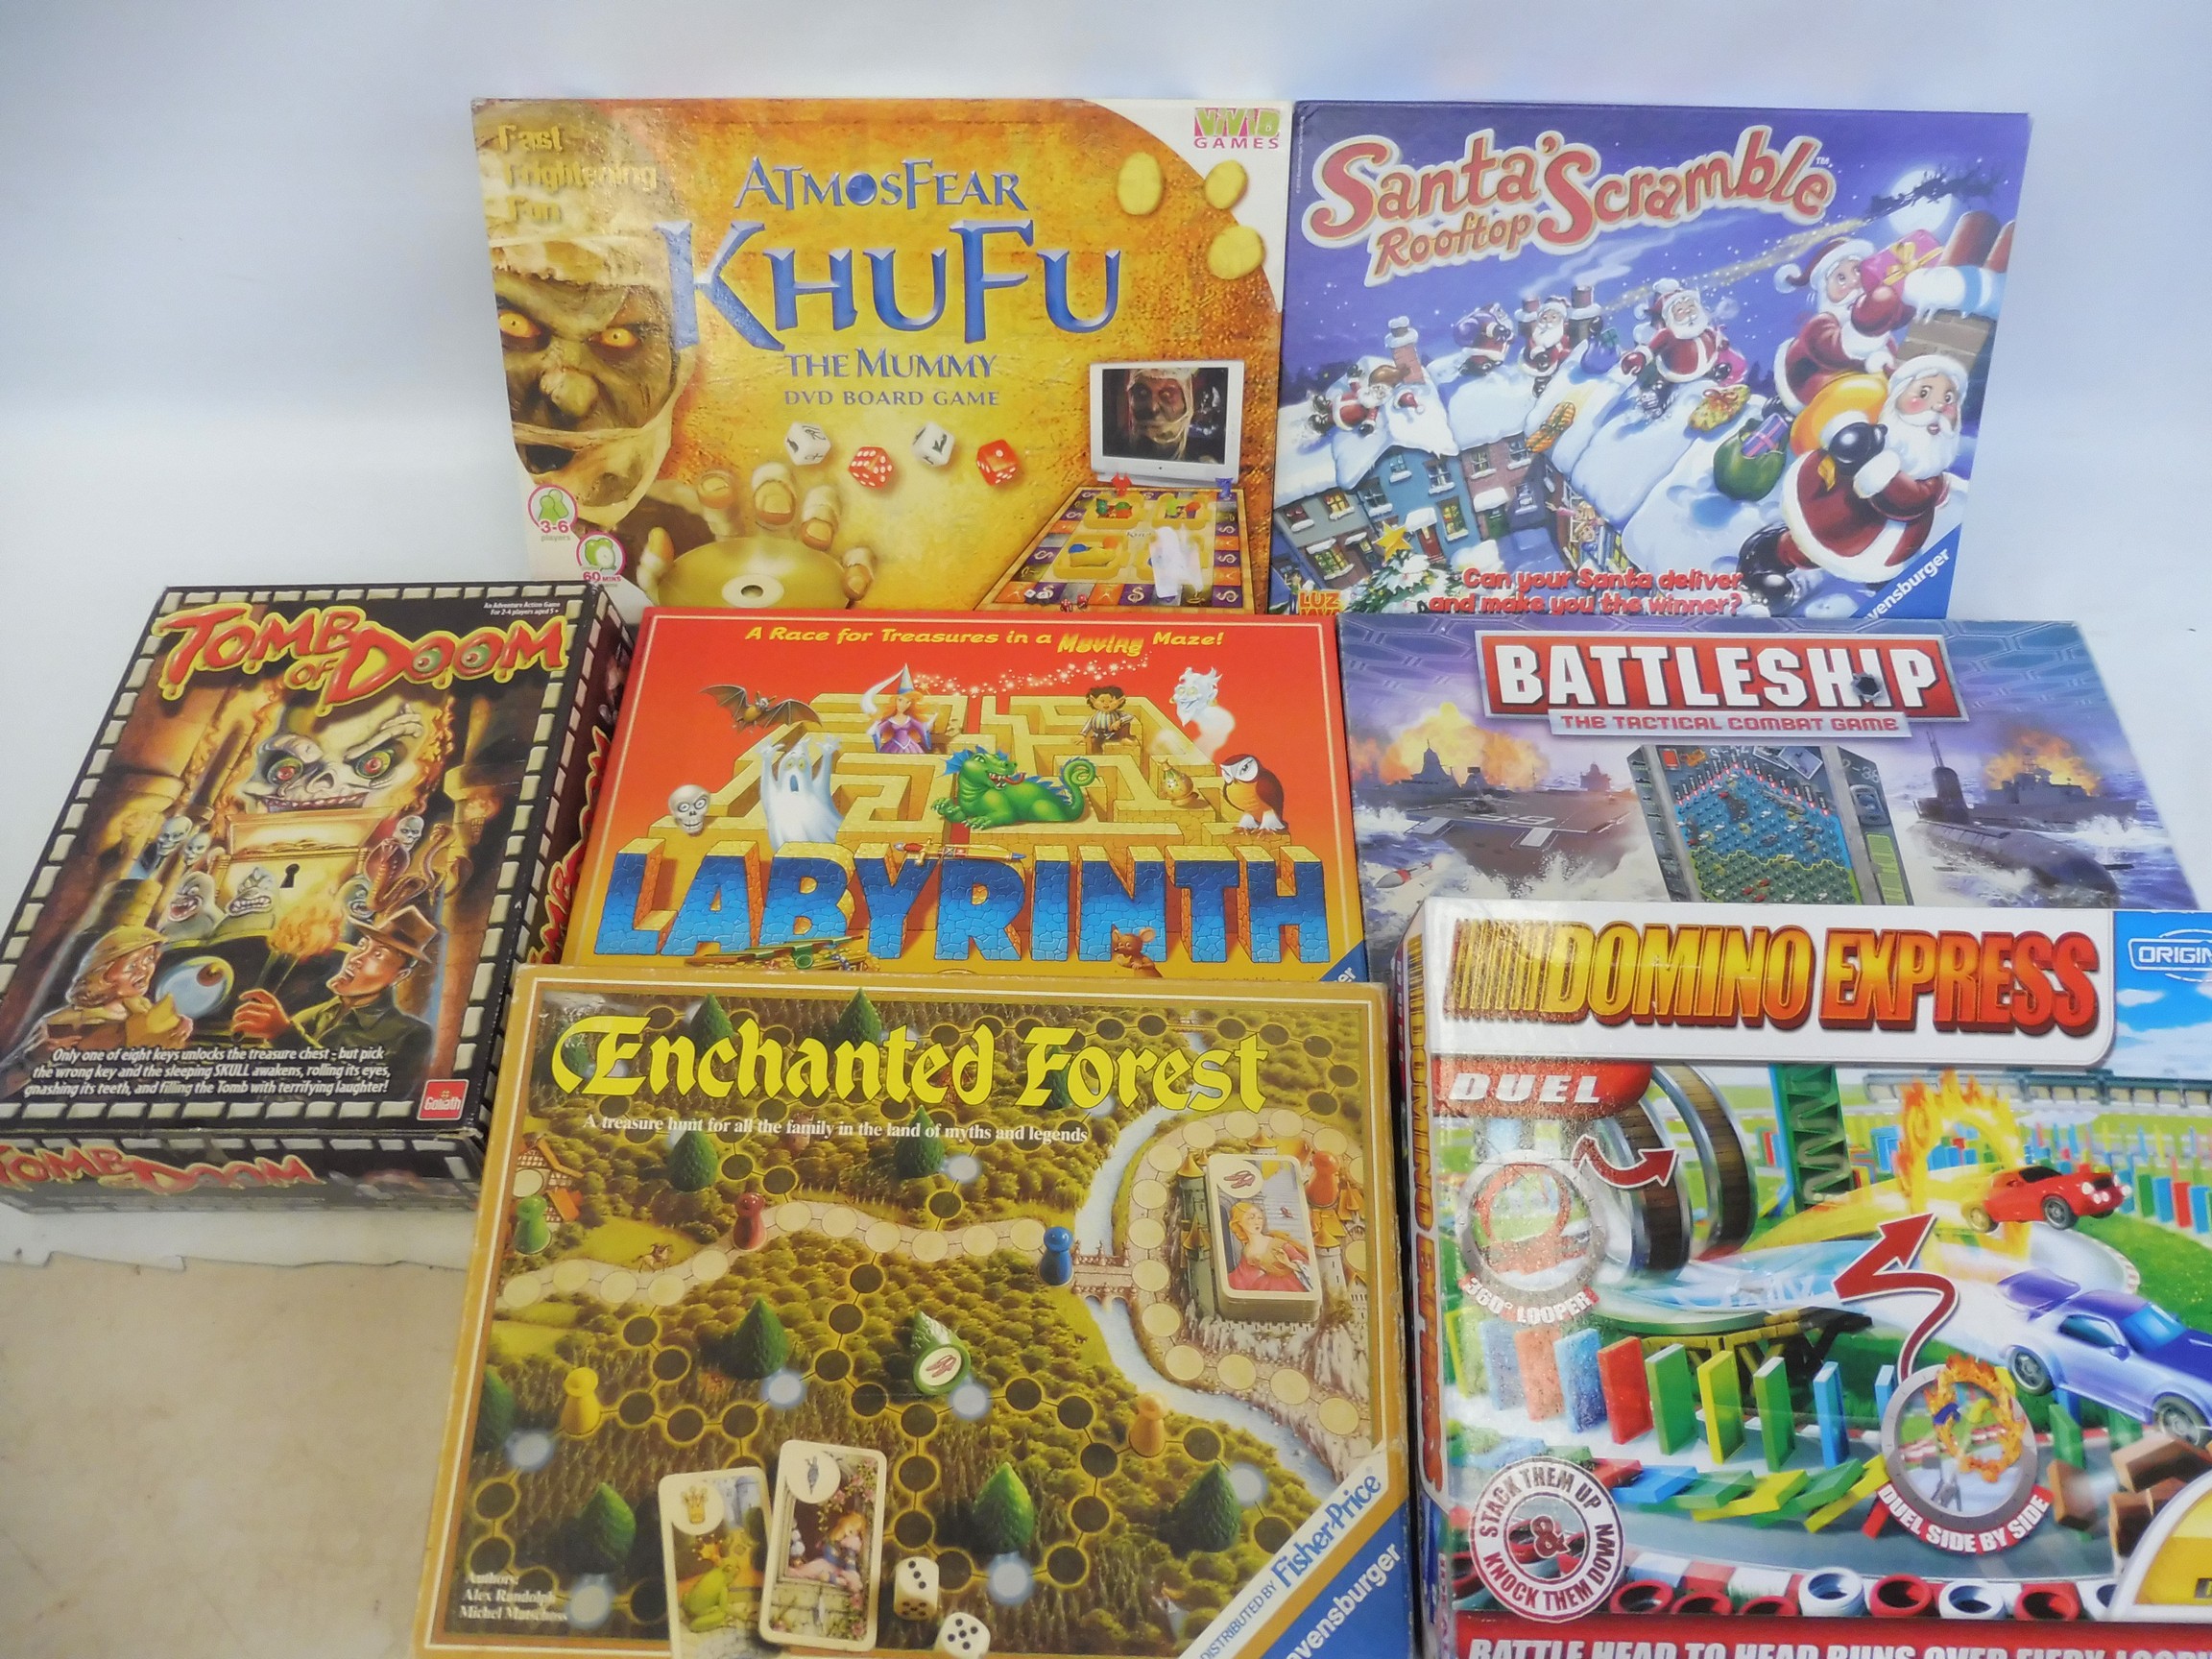 A box of mainly TV related games, different eras and makers.